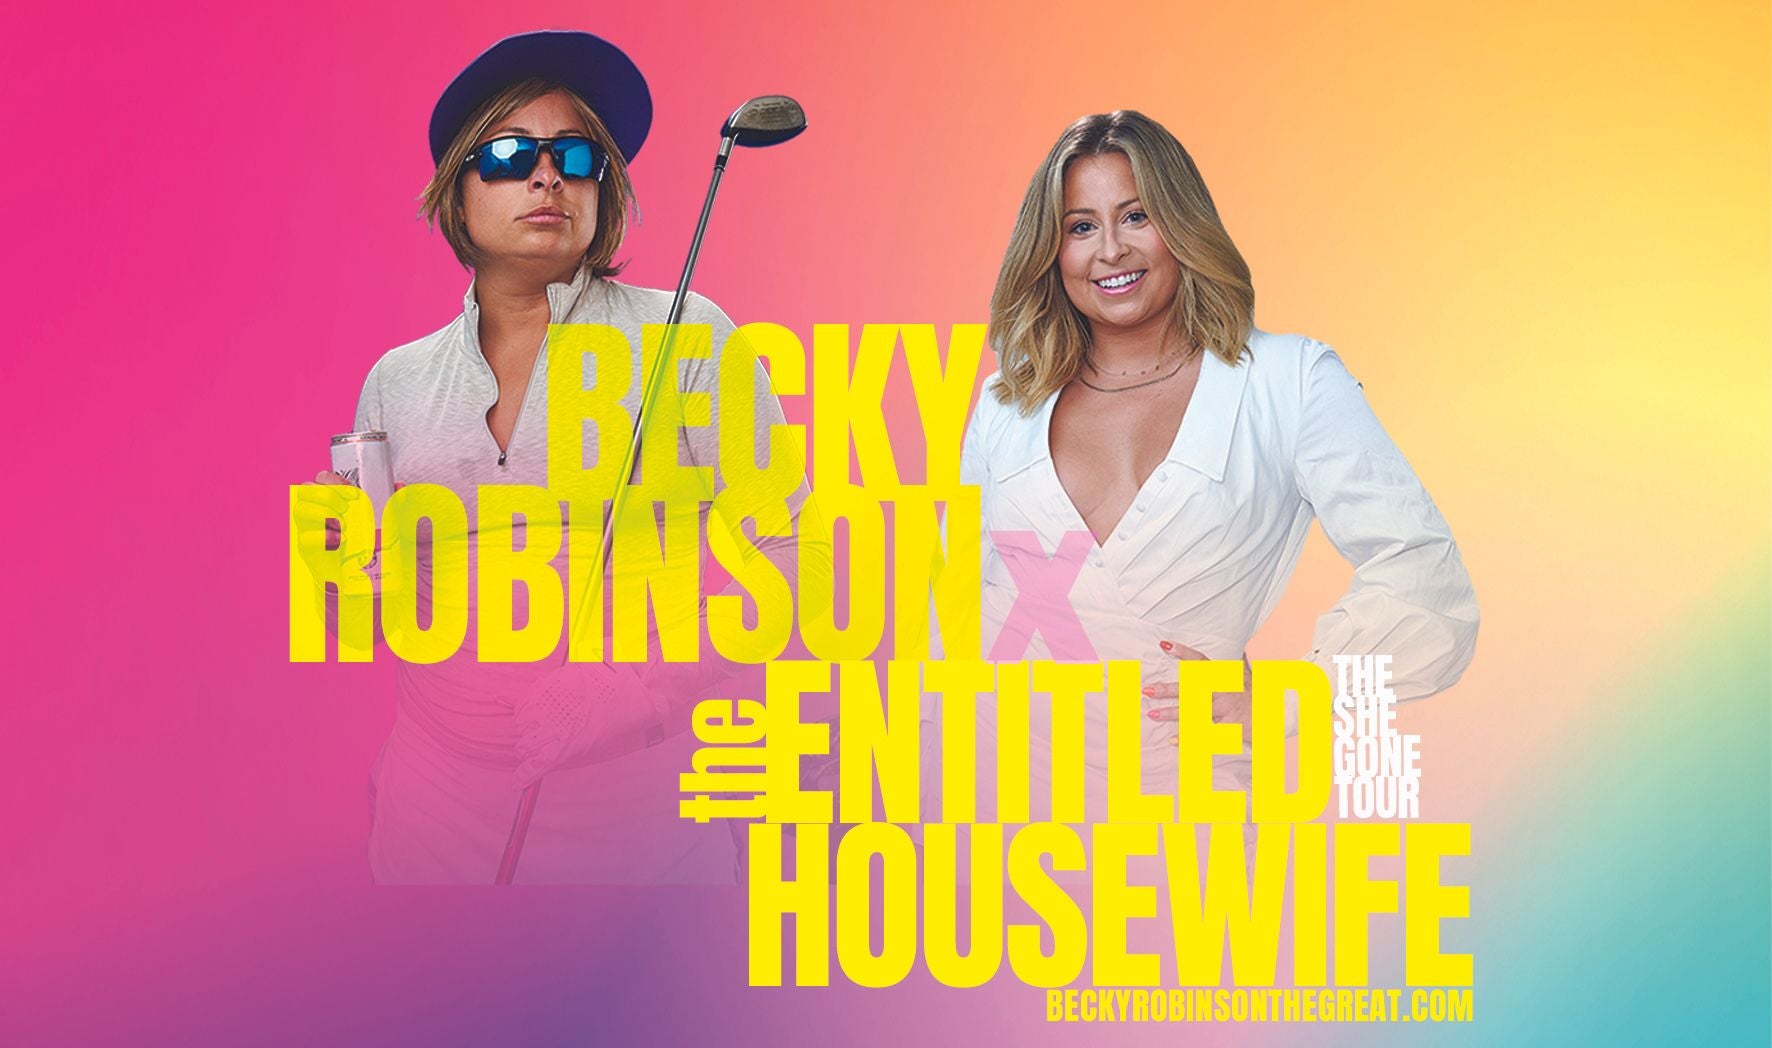 More Info for Becky Robinson: She Gone Tour